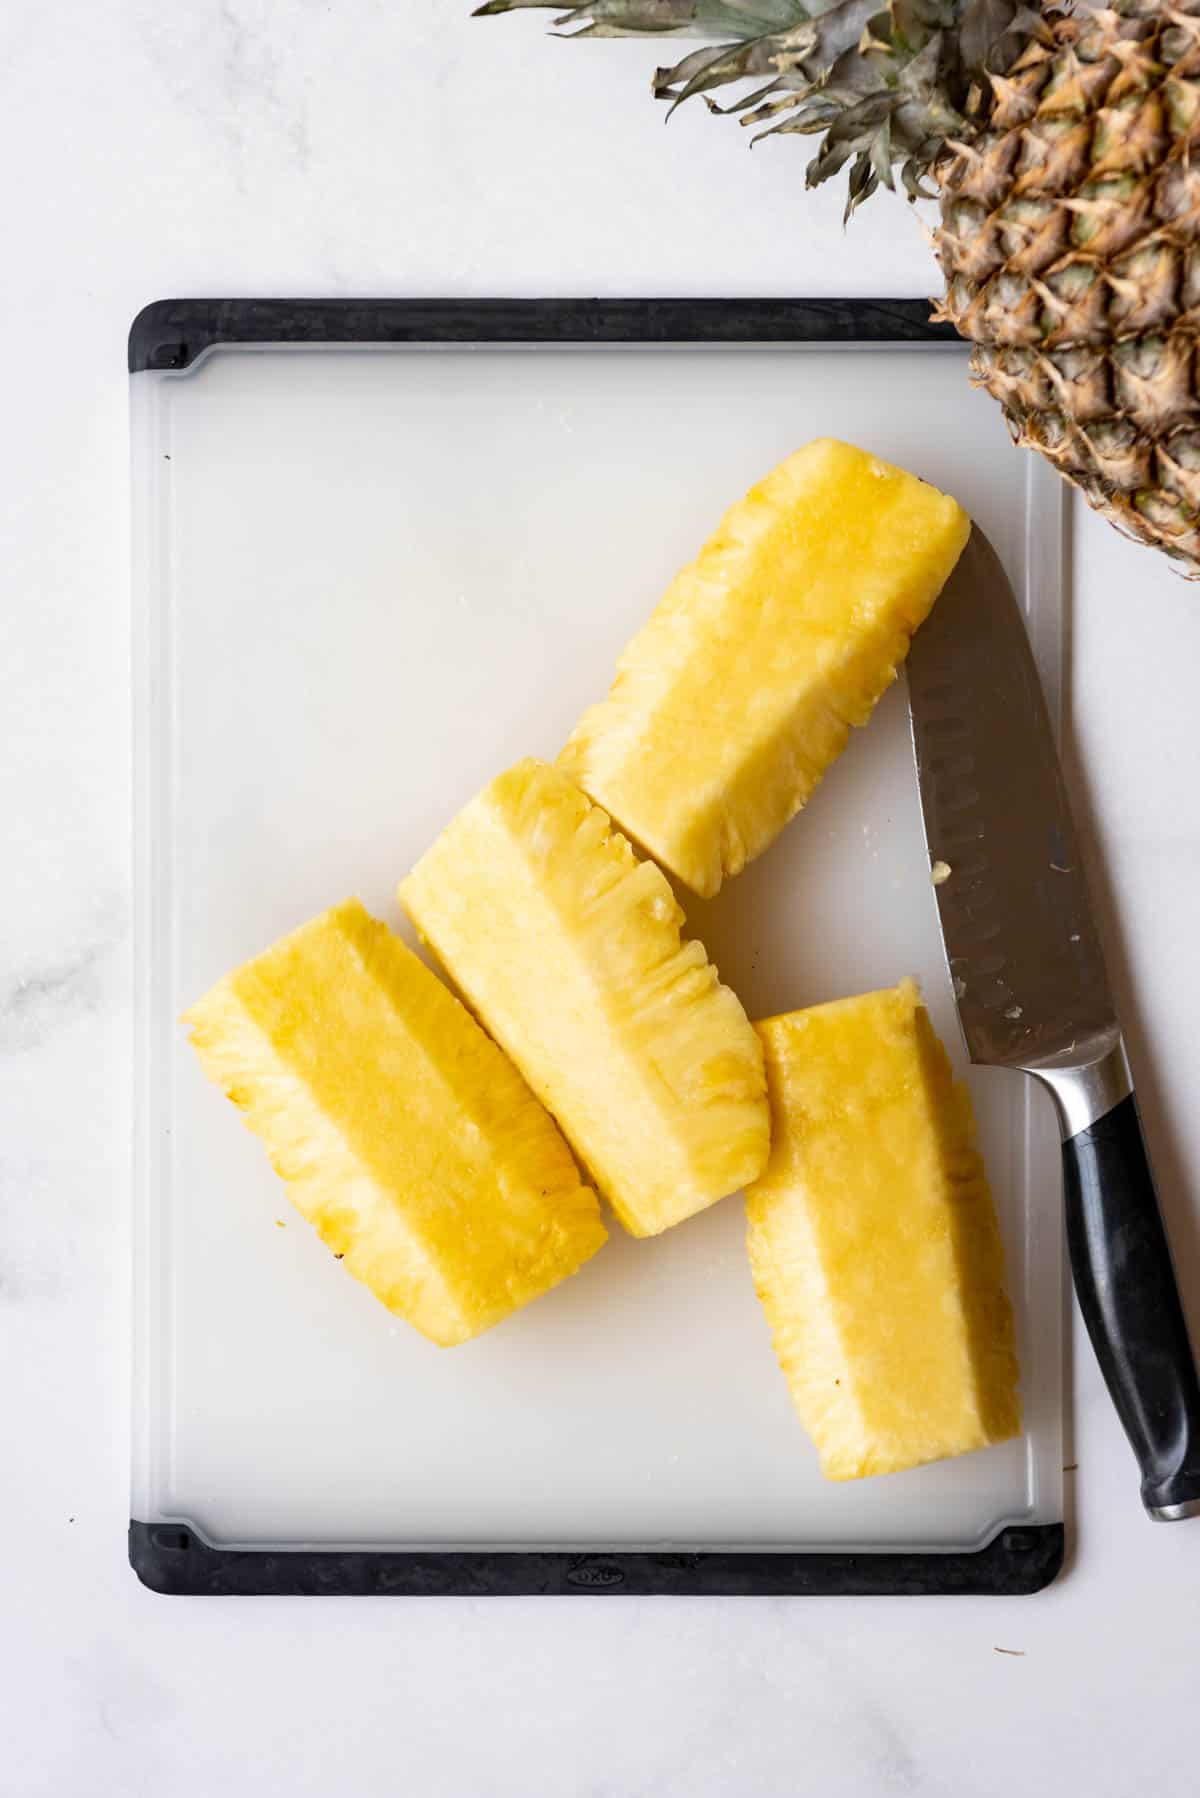 Pineapple spears on a cutting board with a knife.